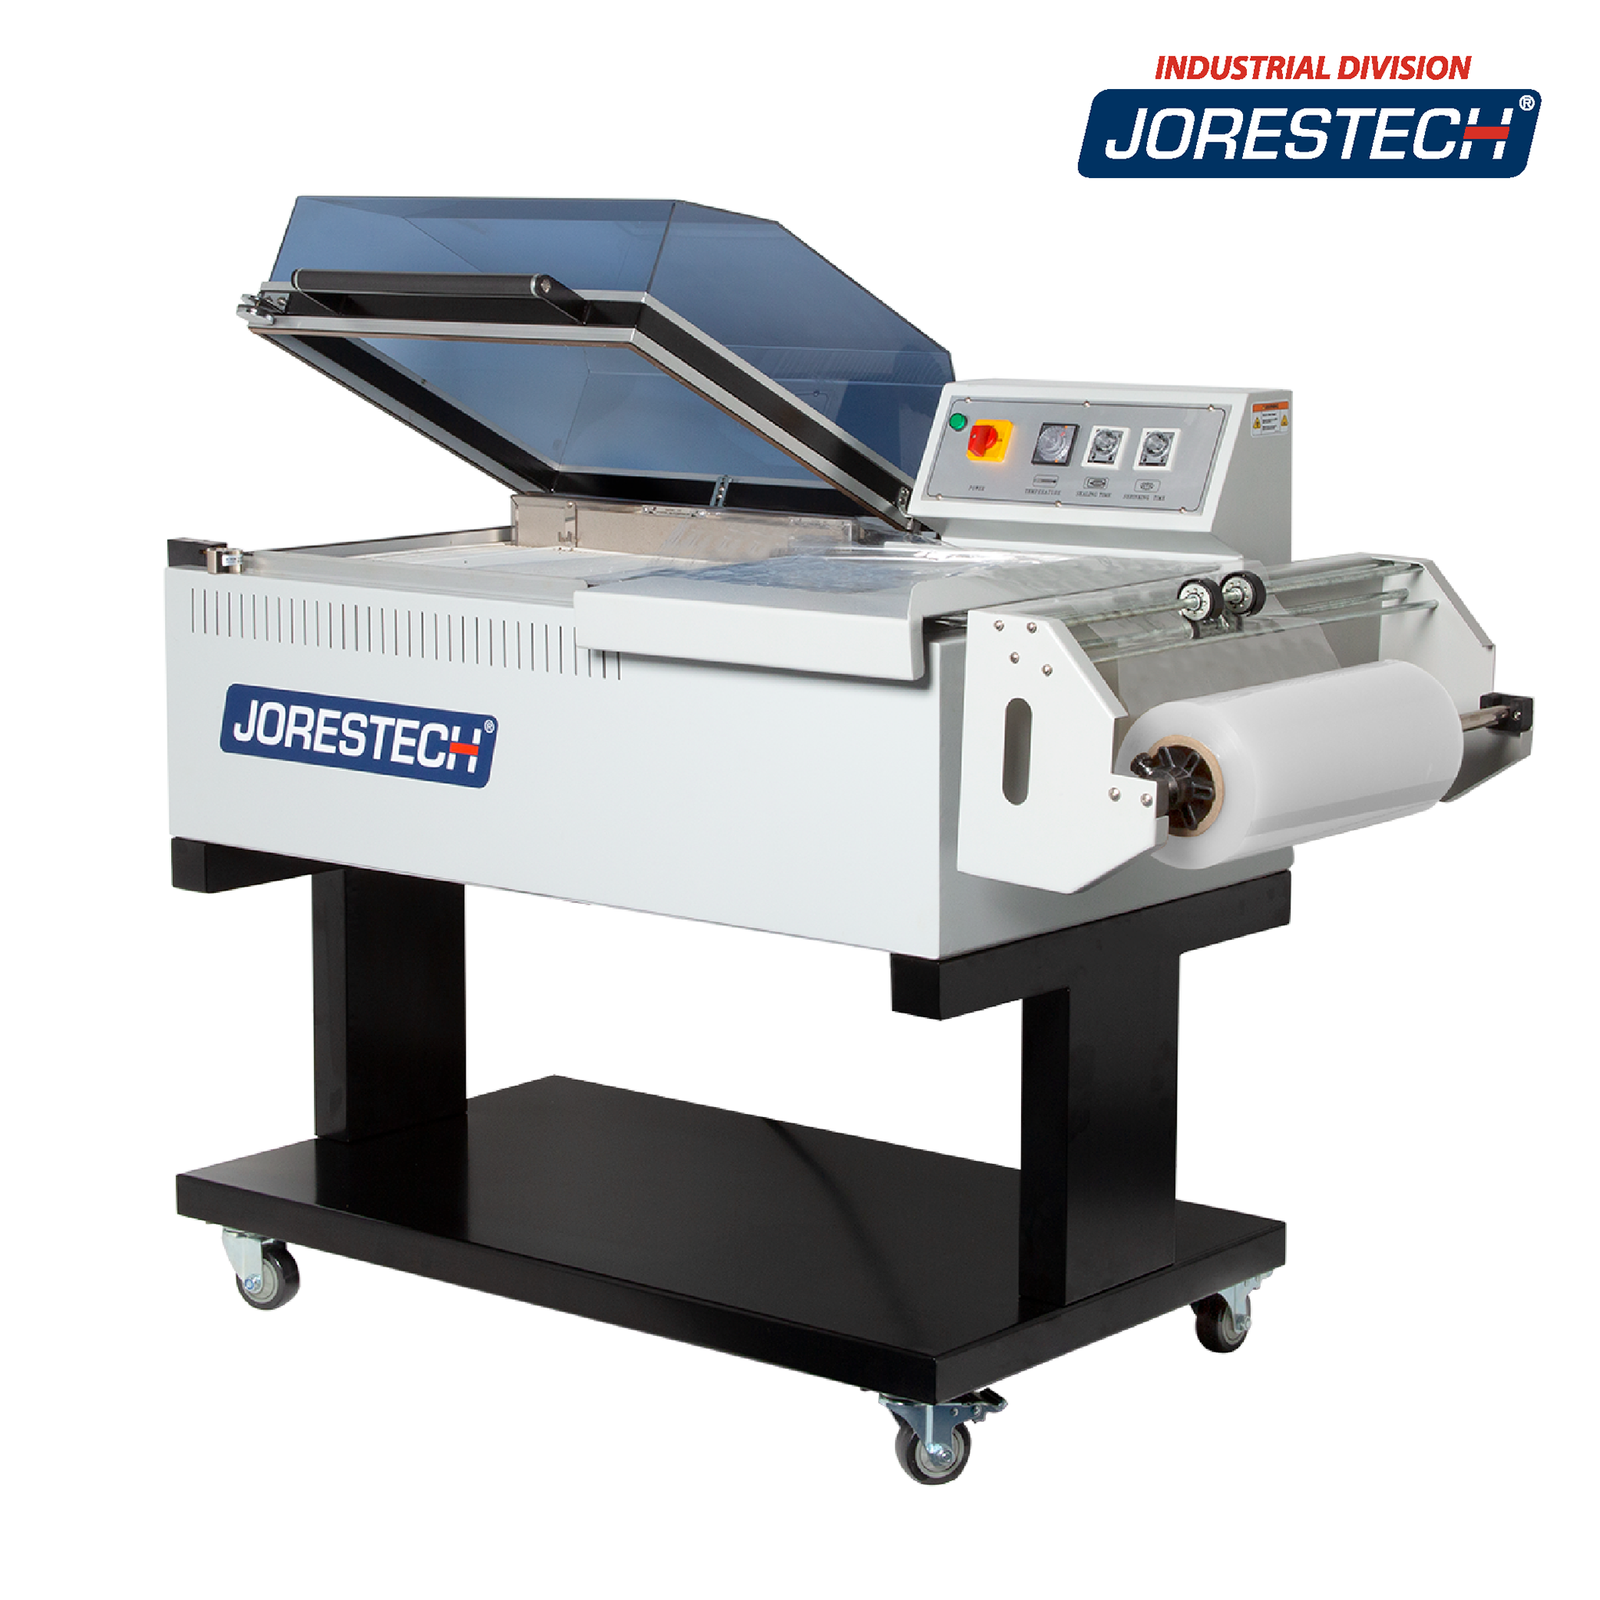 JORES TECHNOLOGIES® Complete sealing system including shrink roll dispenser, plastic sealer and cutter, and a shrink chamber with a shrink film roll mounted over a white background.